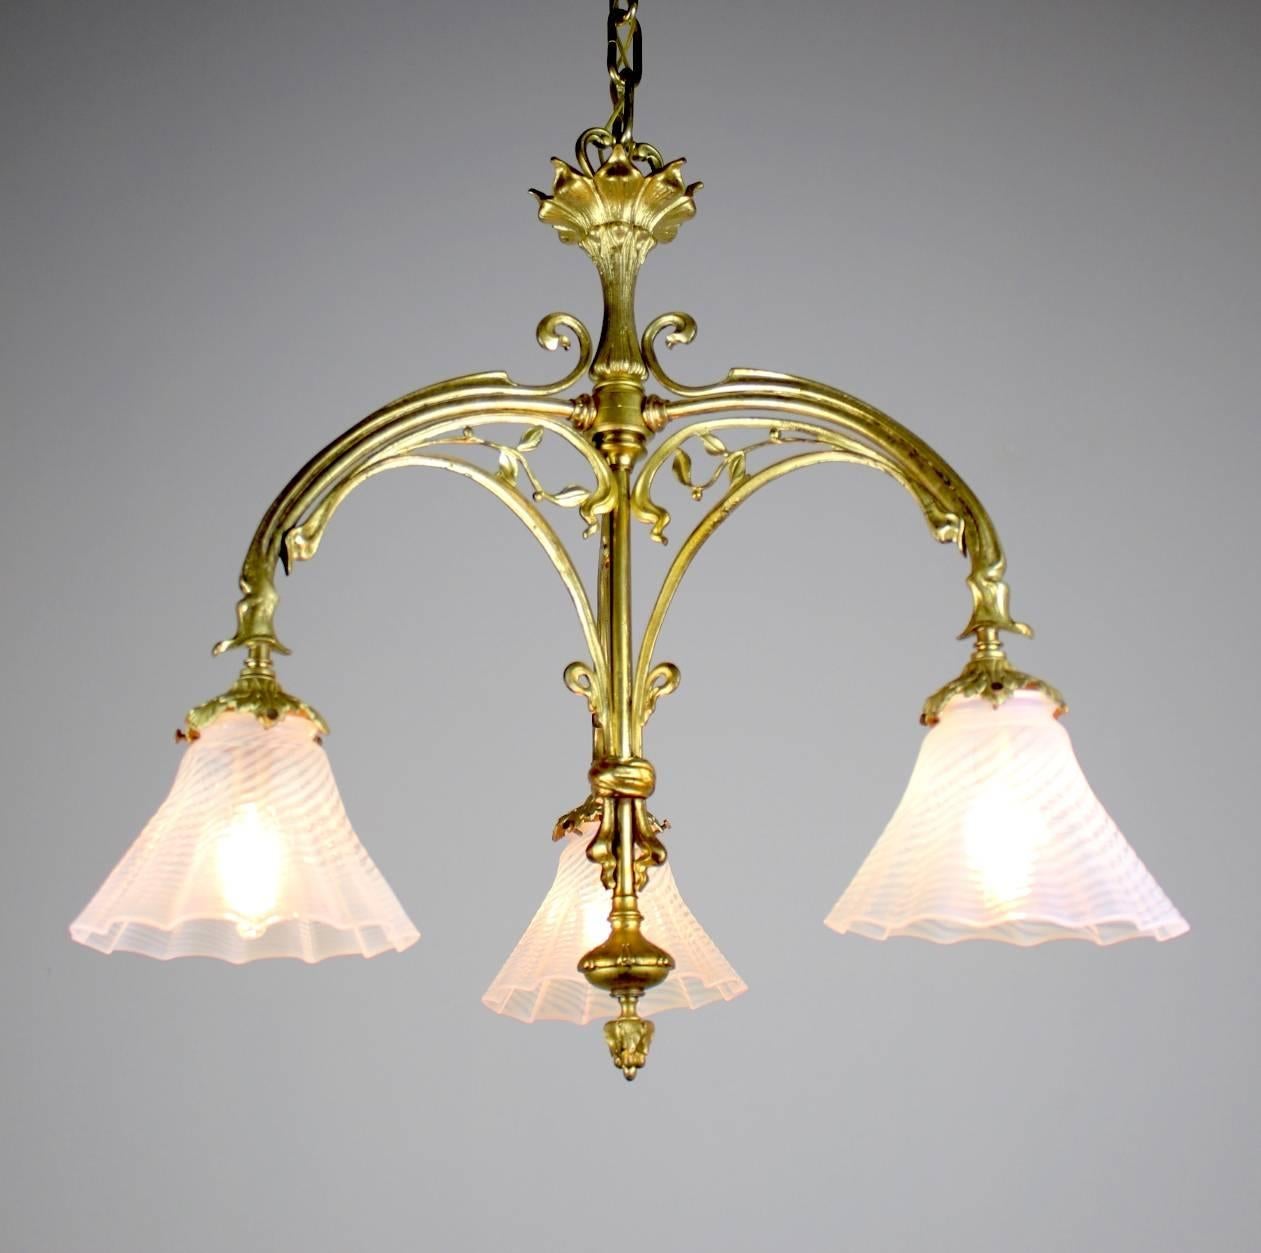 Gorgeous three-light Art Nouveau fixture.

Original ormolu finish with Gothic design overtones.

Fitted with three French twist opalescent art glass shades.

A very beautiful, all original piece.

Measures: 40